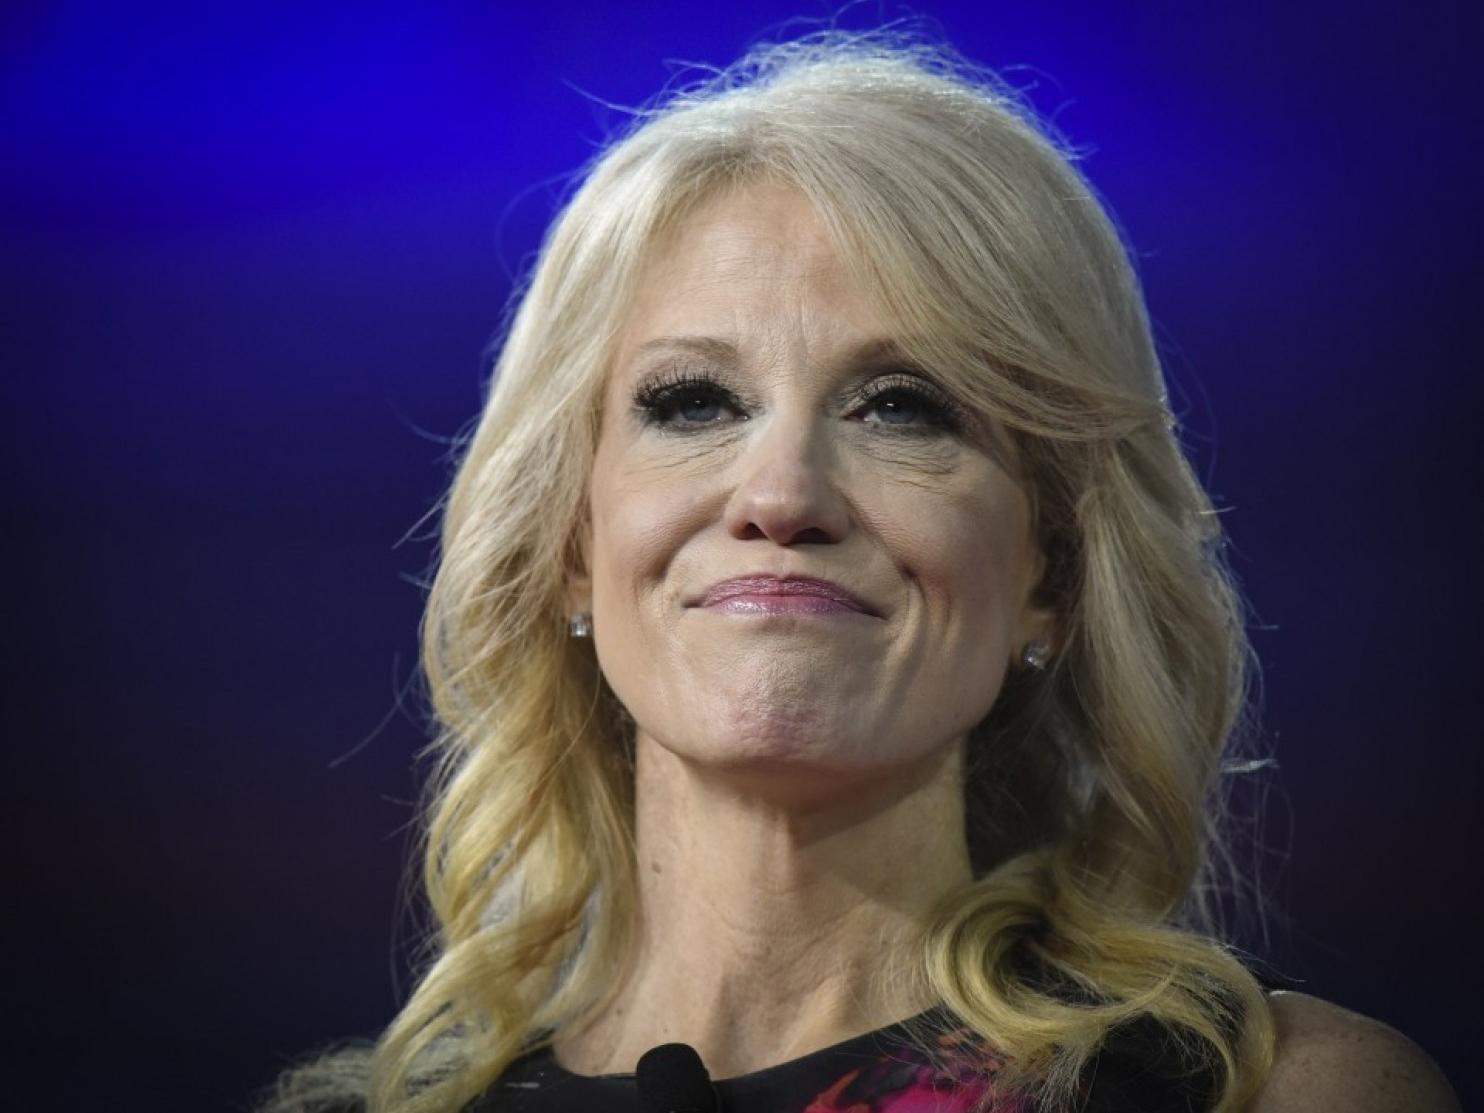 The US ethics watchdog criticised Kellyanne Conway after she used her public position to promote Ivanka Trump's fashion brand